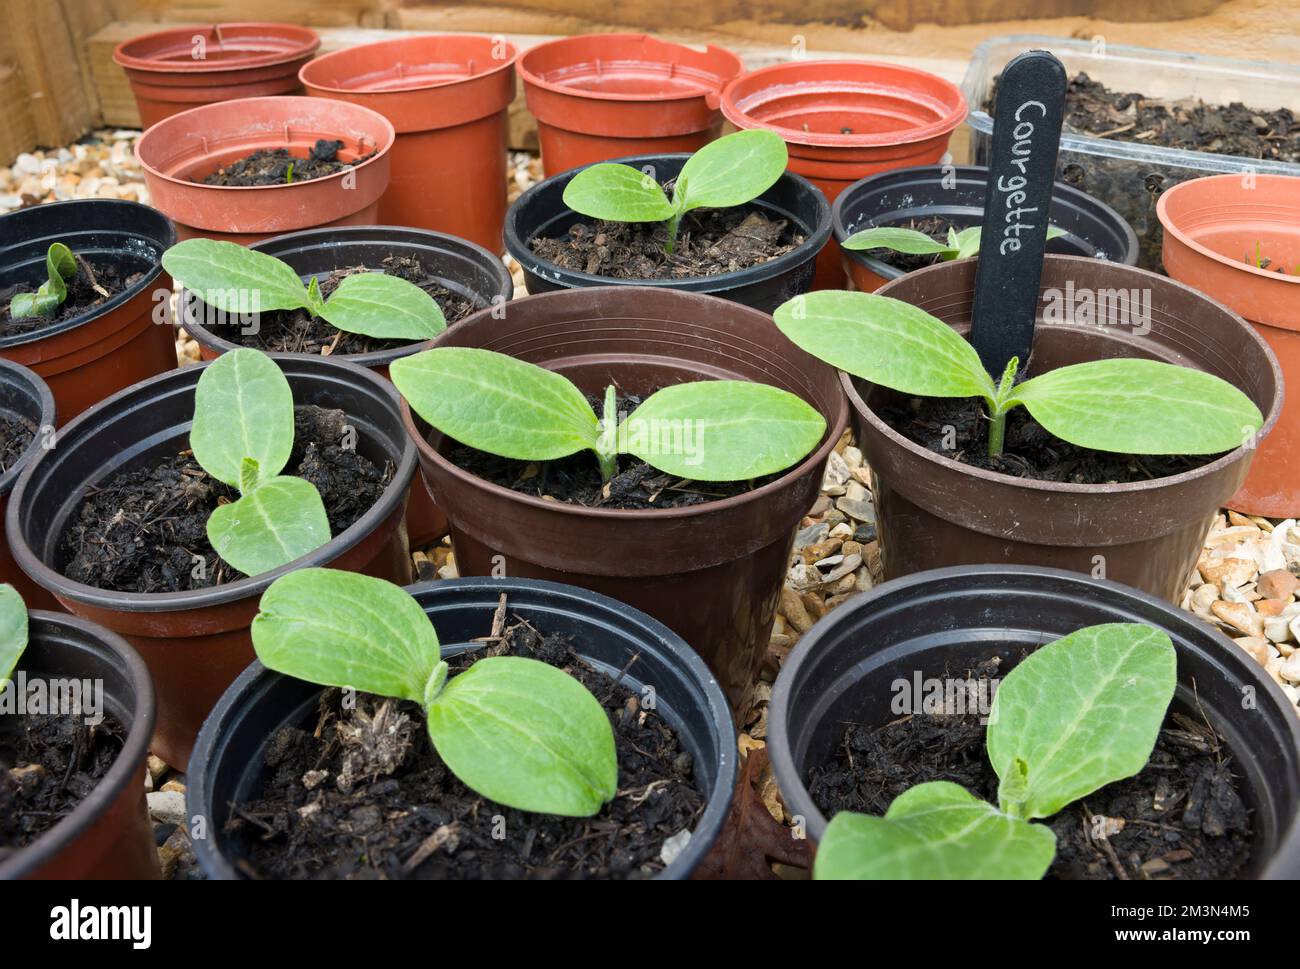 Young courgette plants (zucchini) in pots. Growing vegetable seedlings, UK Stock Photo